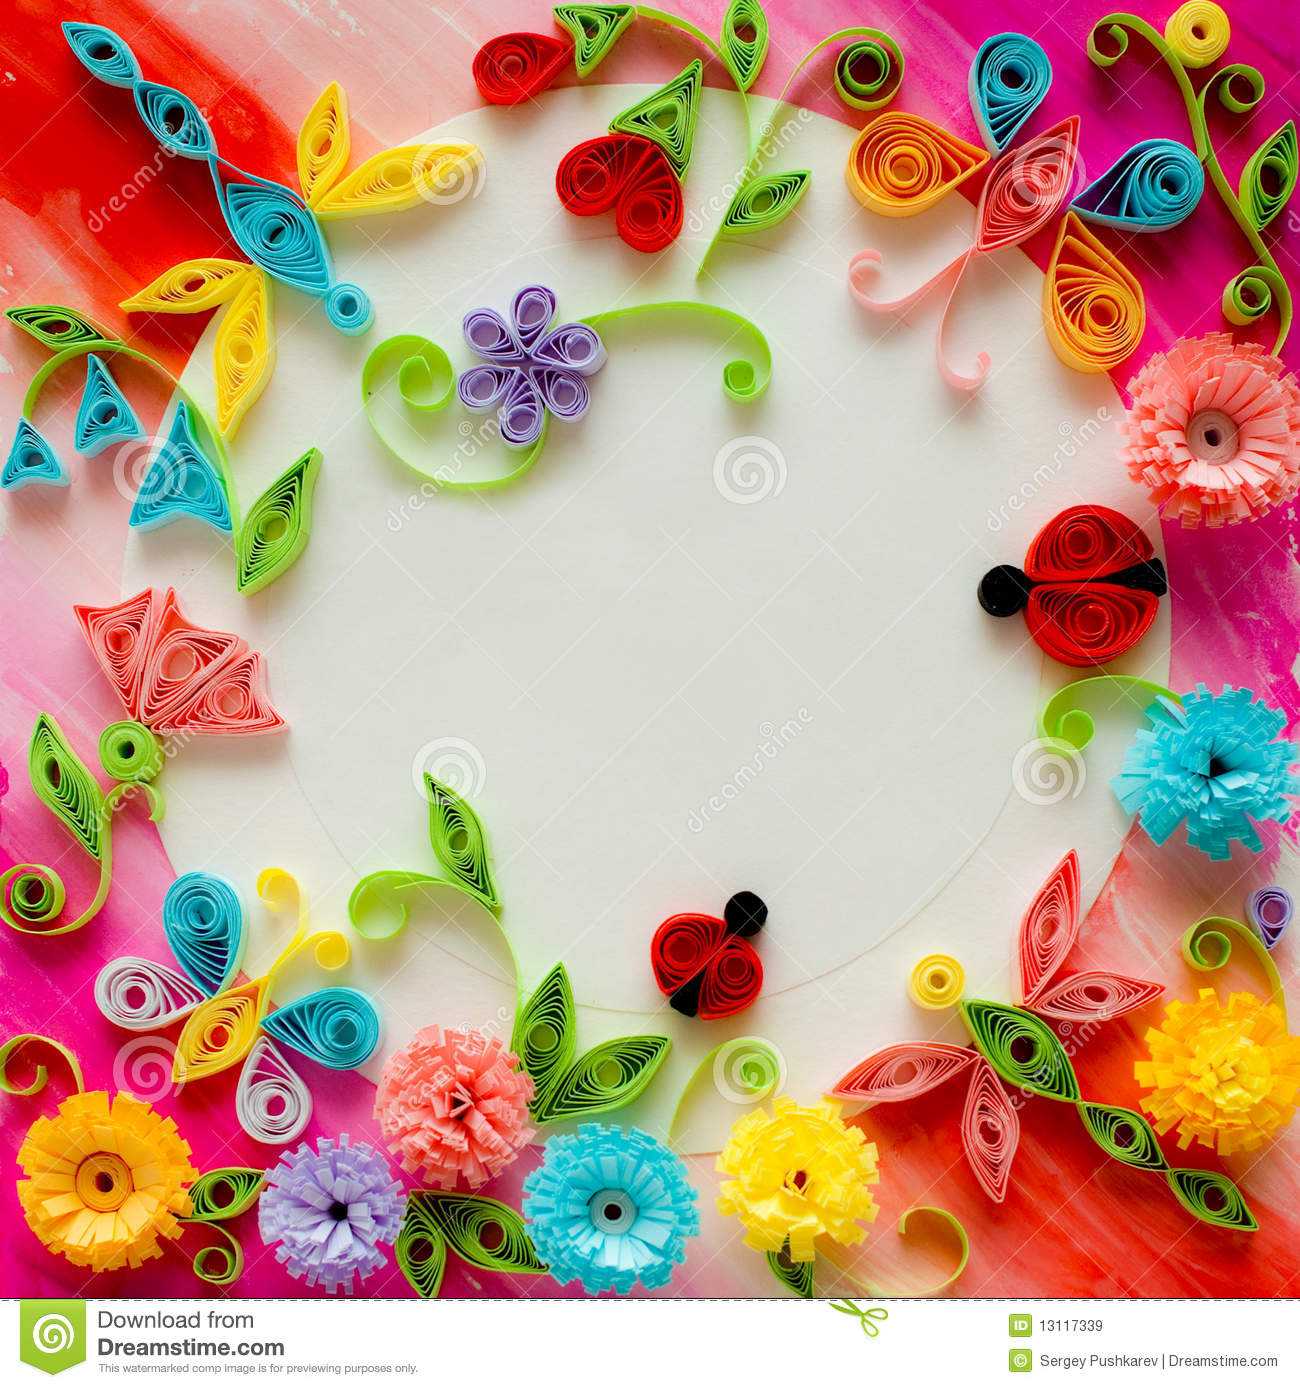 Quilling Greeting Card Blank Template Stock Image – Image Of Regarding Free Printable Blank Greeting Card Templates